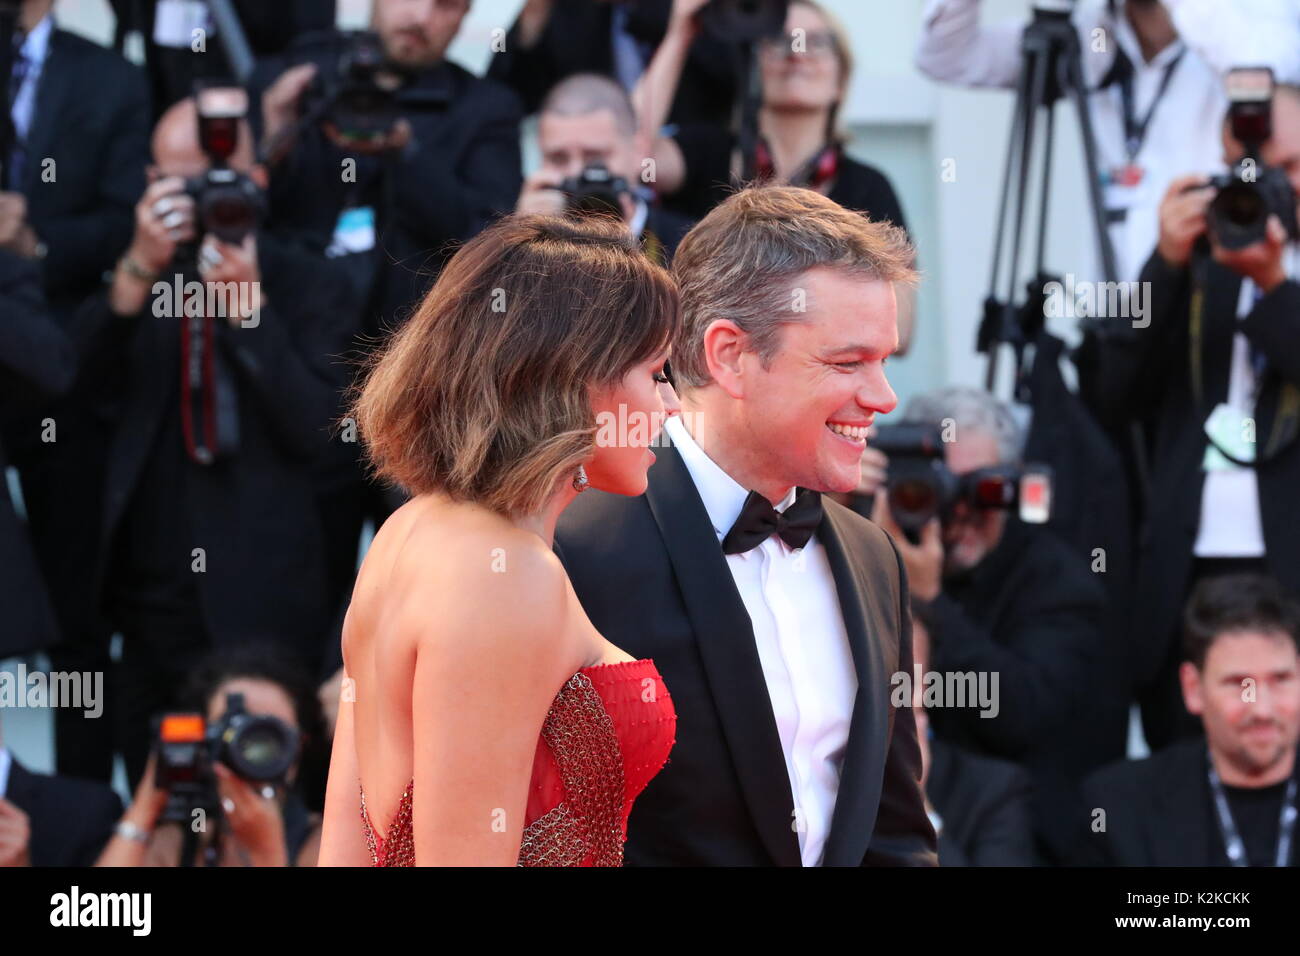 Venice, Italy. 30th Aug, 2017. VENICE, ITALY - AUGUST 30: Luciana Barroso and Matt Damon walk the red carpet ahead of the 'Downsizing' screening and Opening Ceremony during the 74th Venice Film Festival at Sala Grande on August 30, 2017 in Venice, Italy. Credit: Graziano Quaglia/Alamy Live News Stock Photo